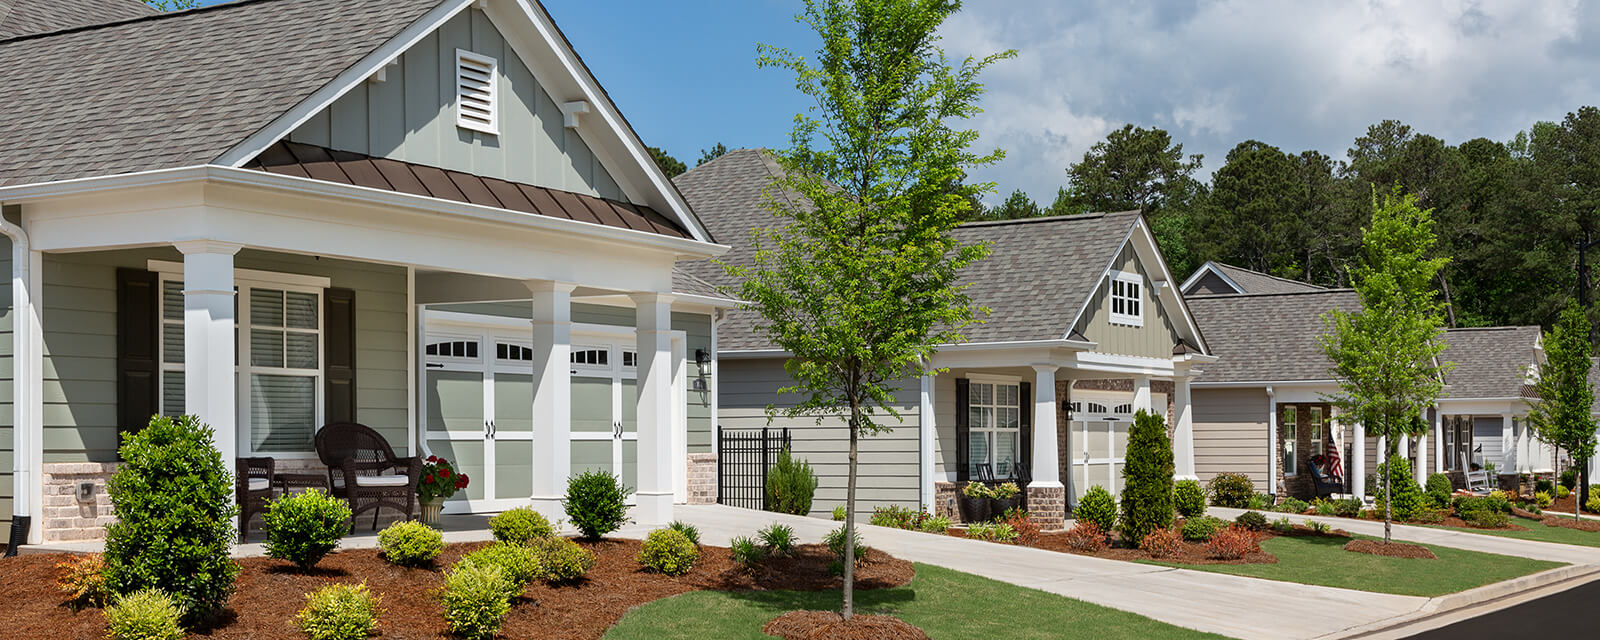 Thoughtful architecture goes into designing our many ranch style homes available in our 55+ active adult communities located throughout Georgia, including Cherokee, Cobb and Paulding counties.